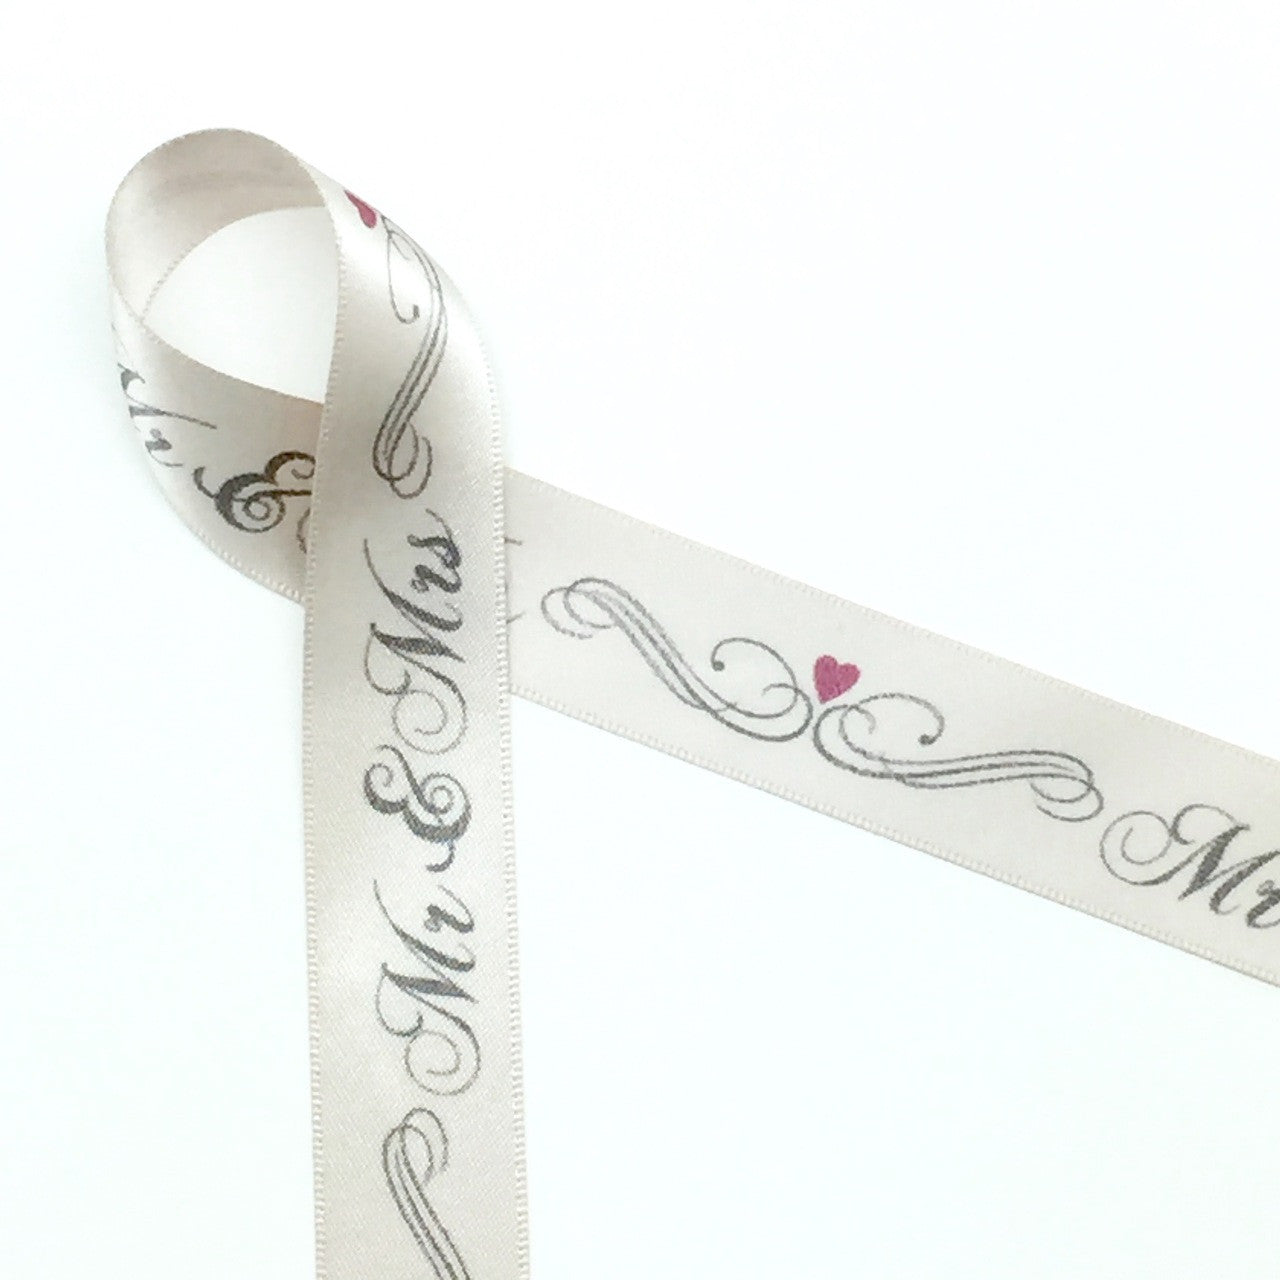 Mr. & Mrs. with scrolls and hearts on 7/8" double face satin ribbon on 10 yard spools. Designed and printed in the USA